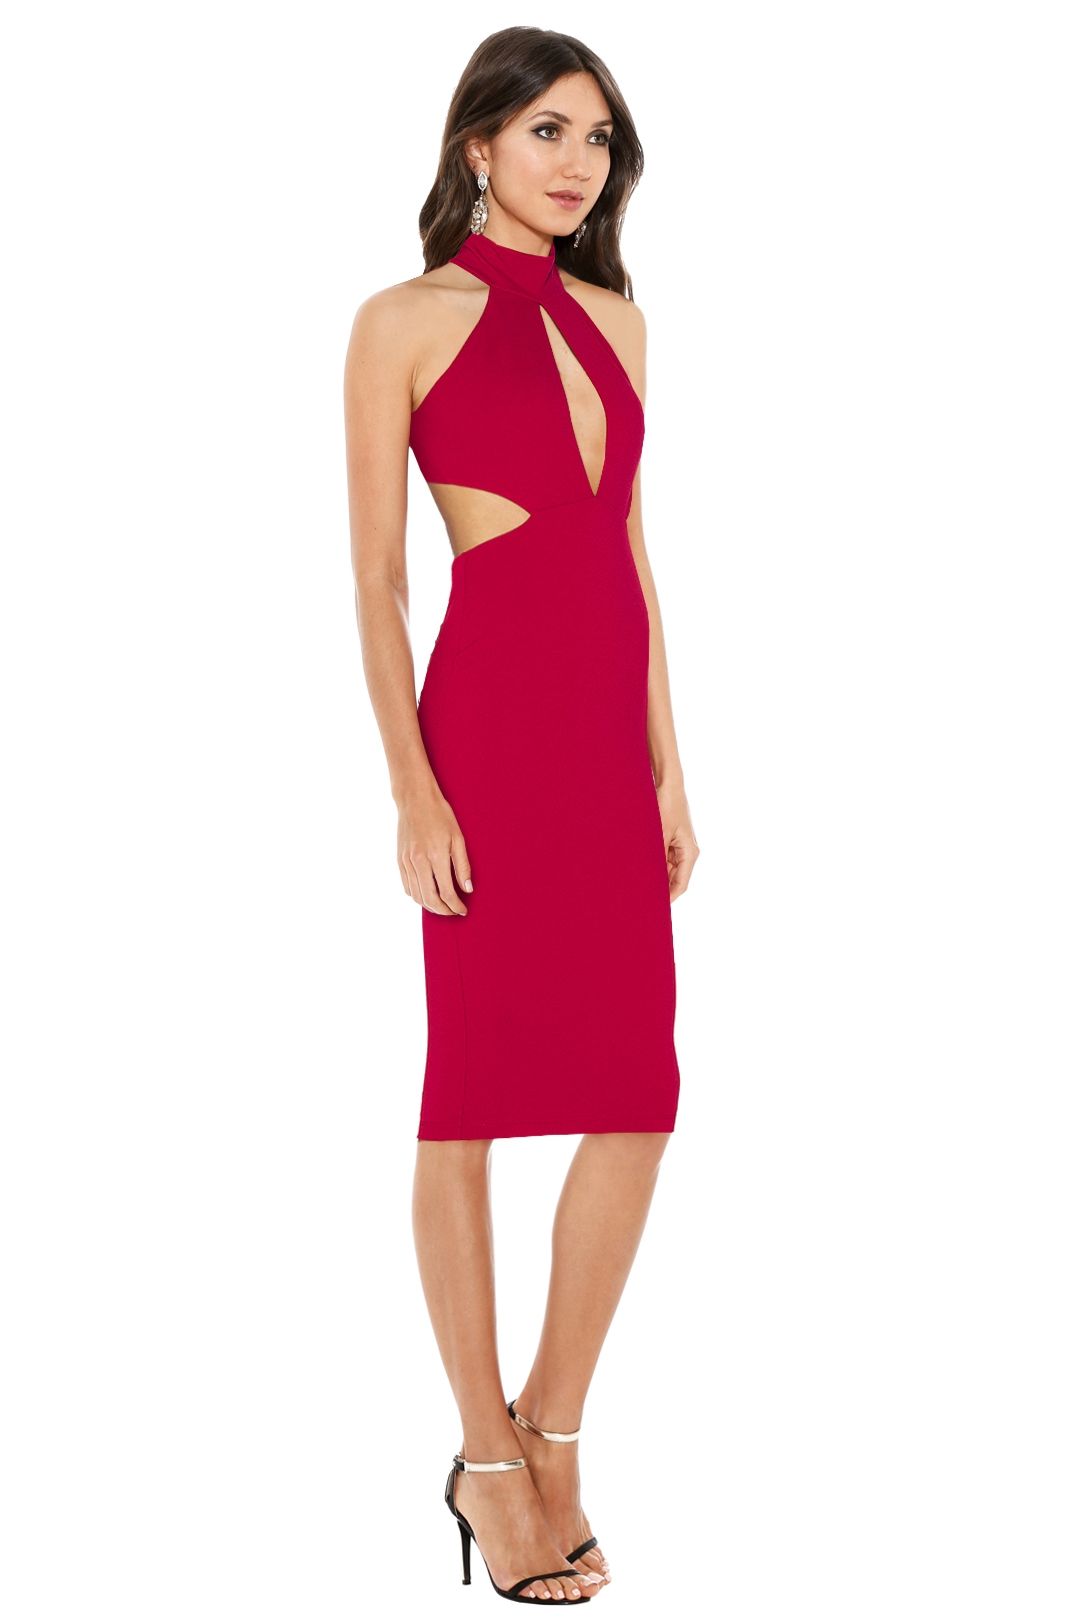 Nookie - Wicked Games Midi Dress - Red - Side